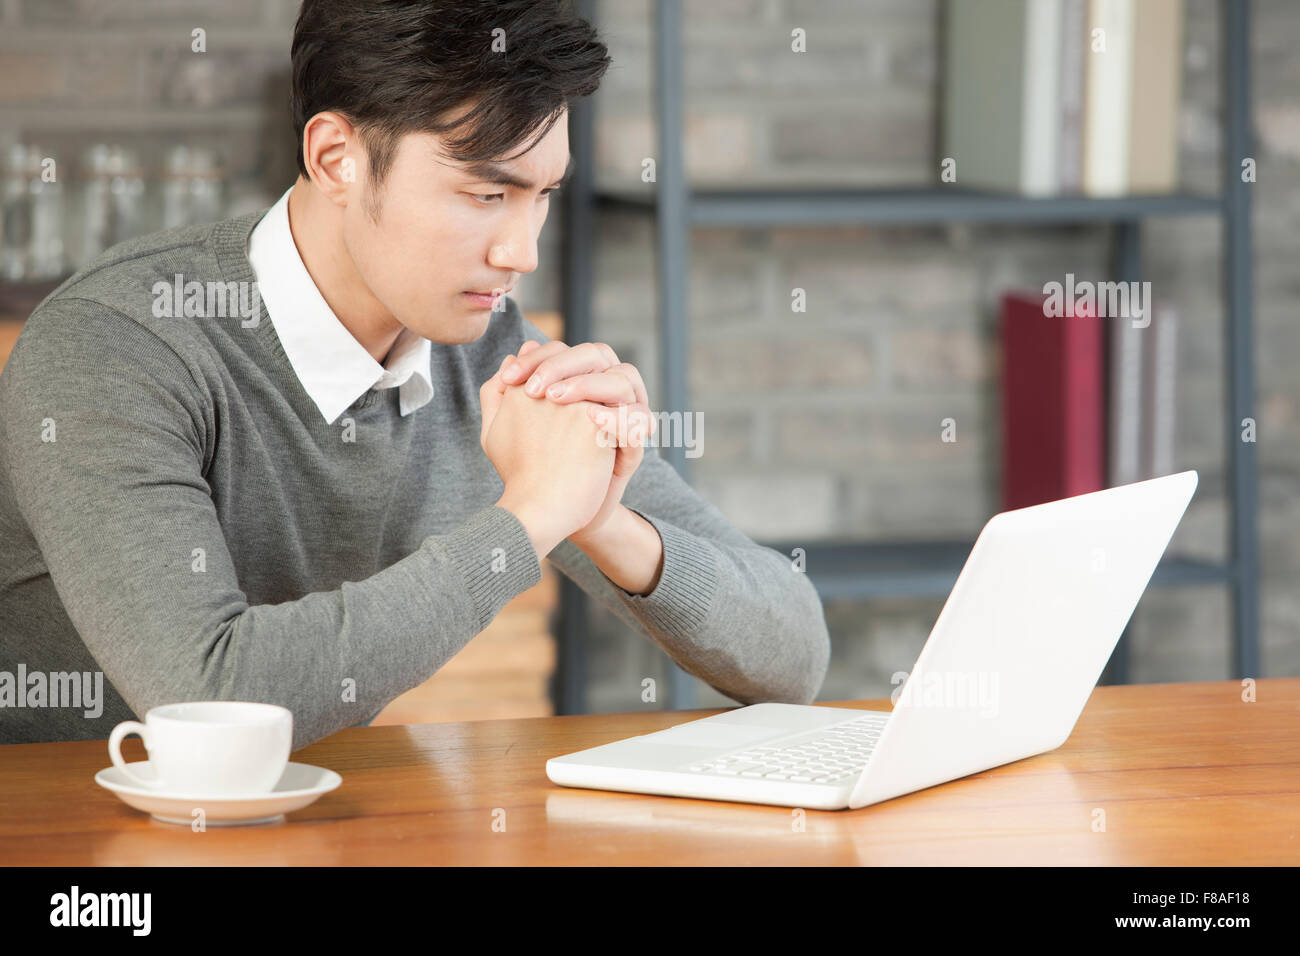 Man with hands clasped sitting at table and looking at laptop Stock Photo